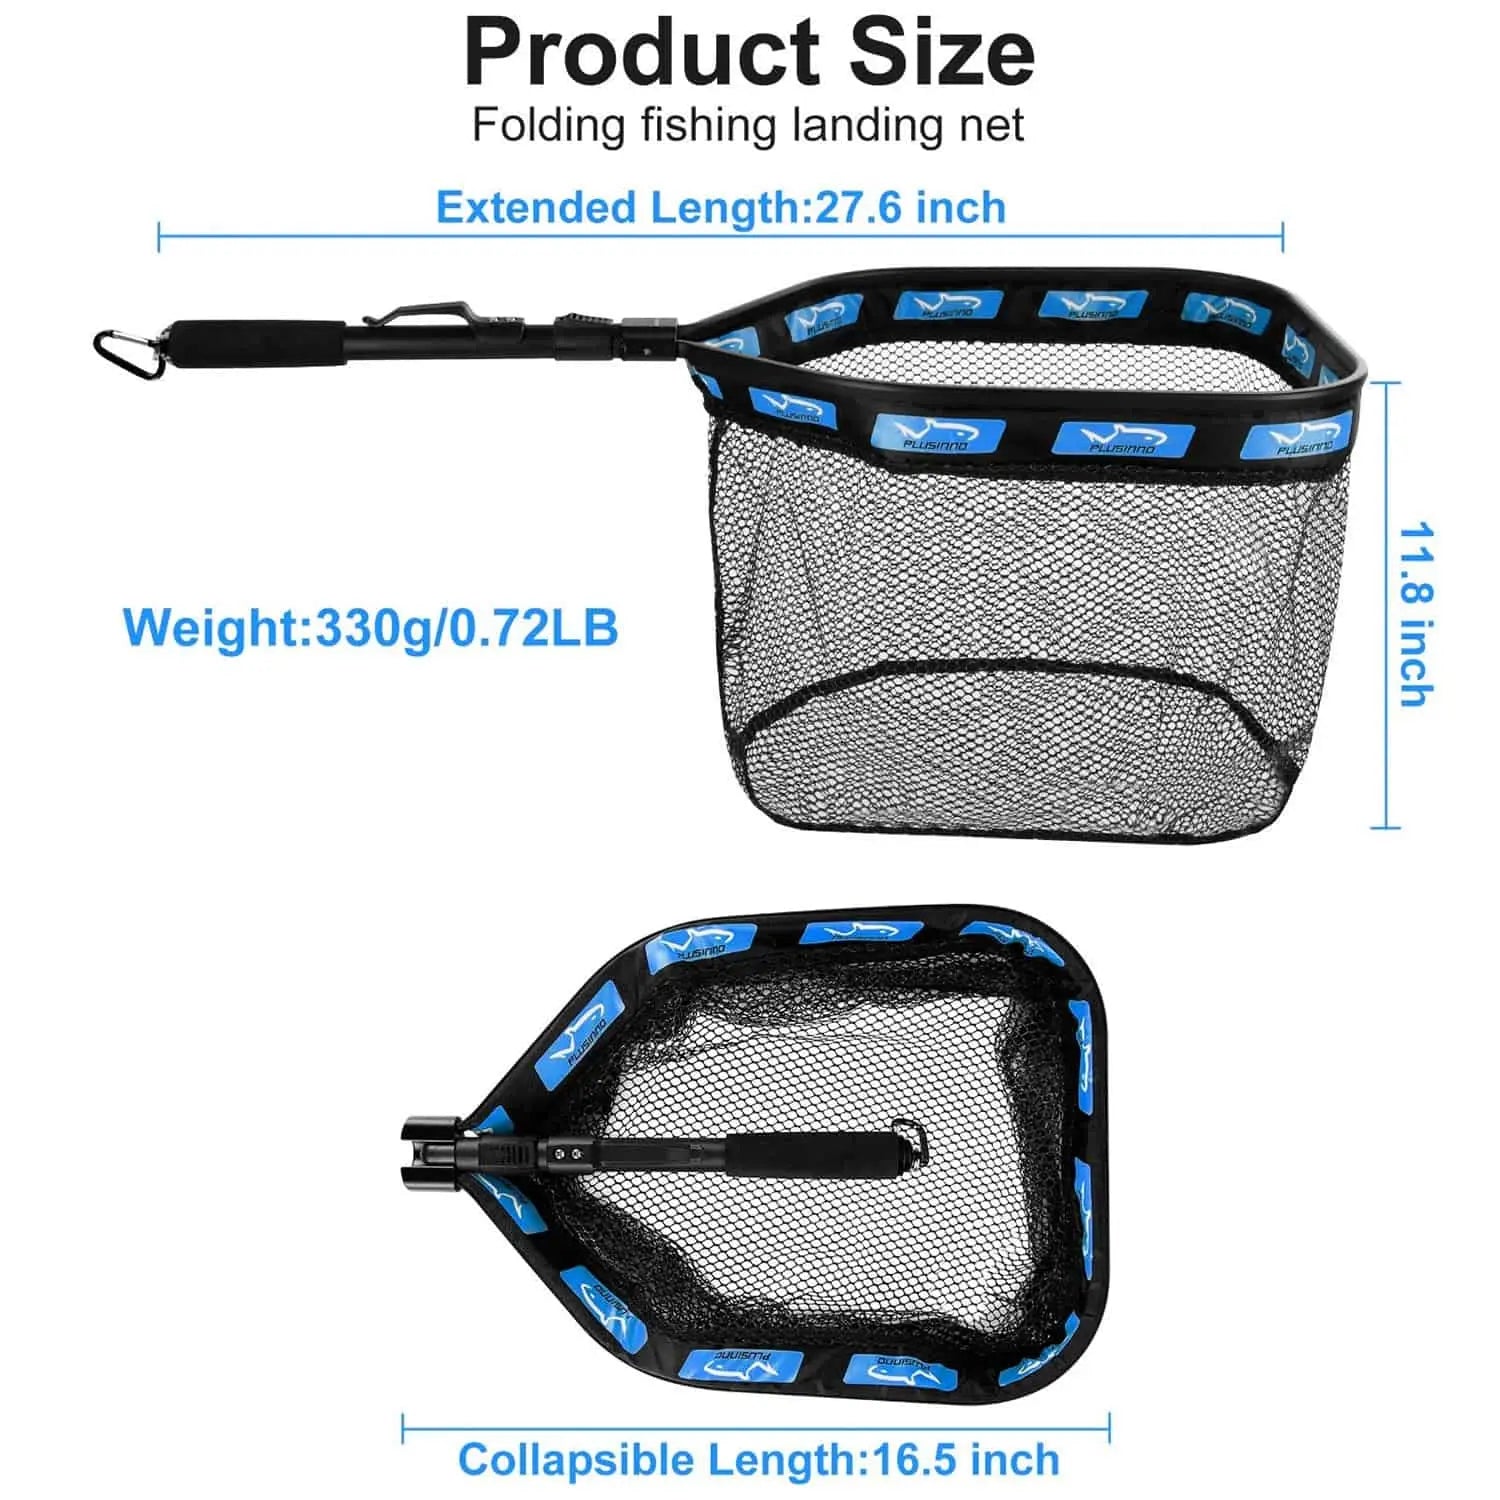 PLUSINNO Foldable Collapsible Net Review / Budget Friendly Fishing